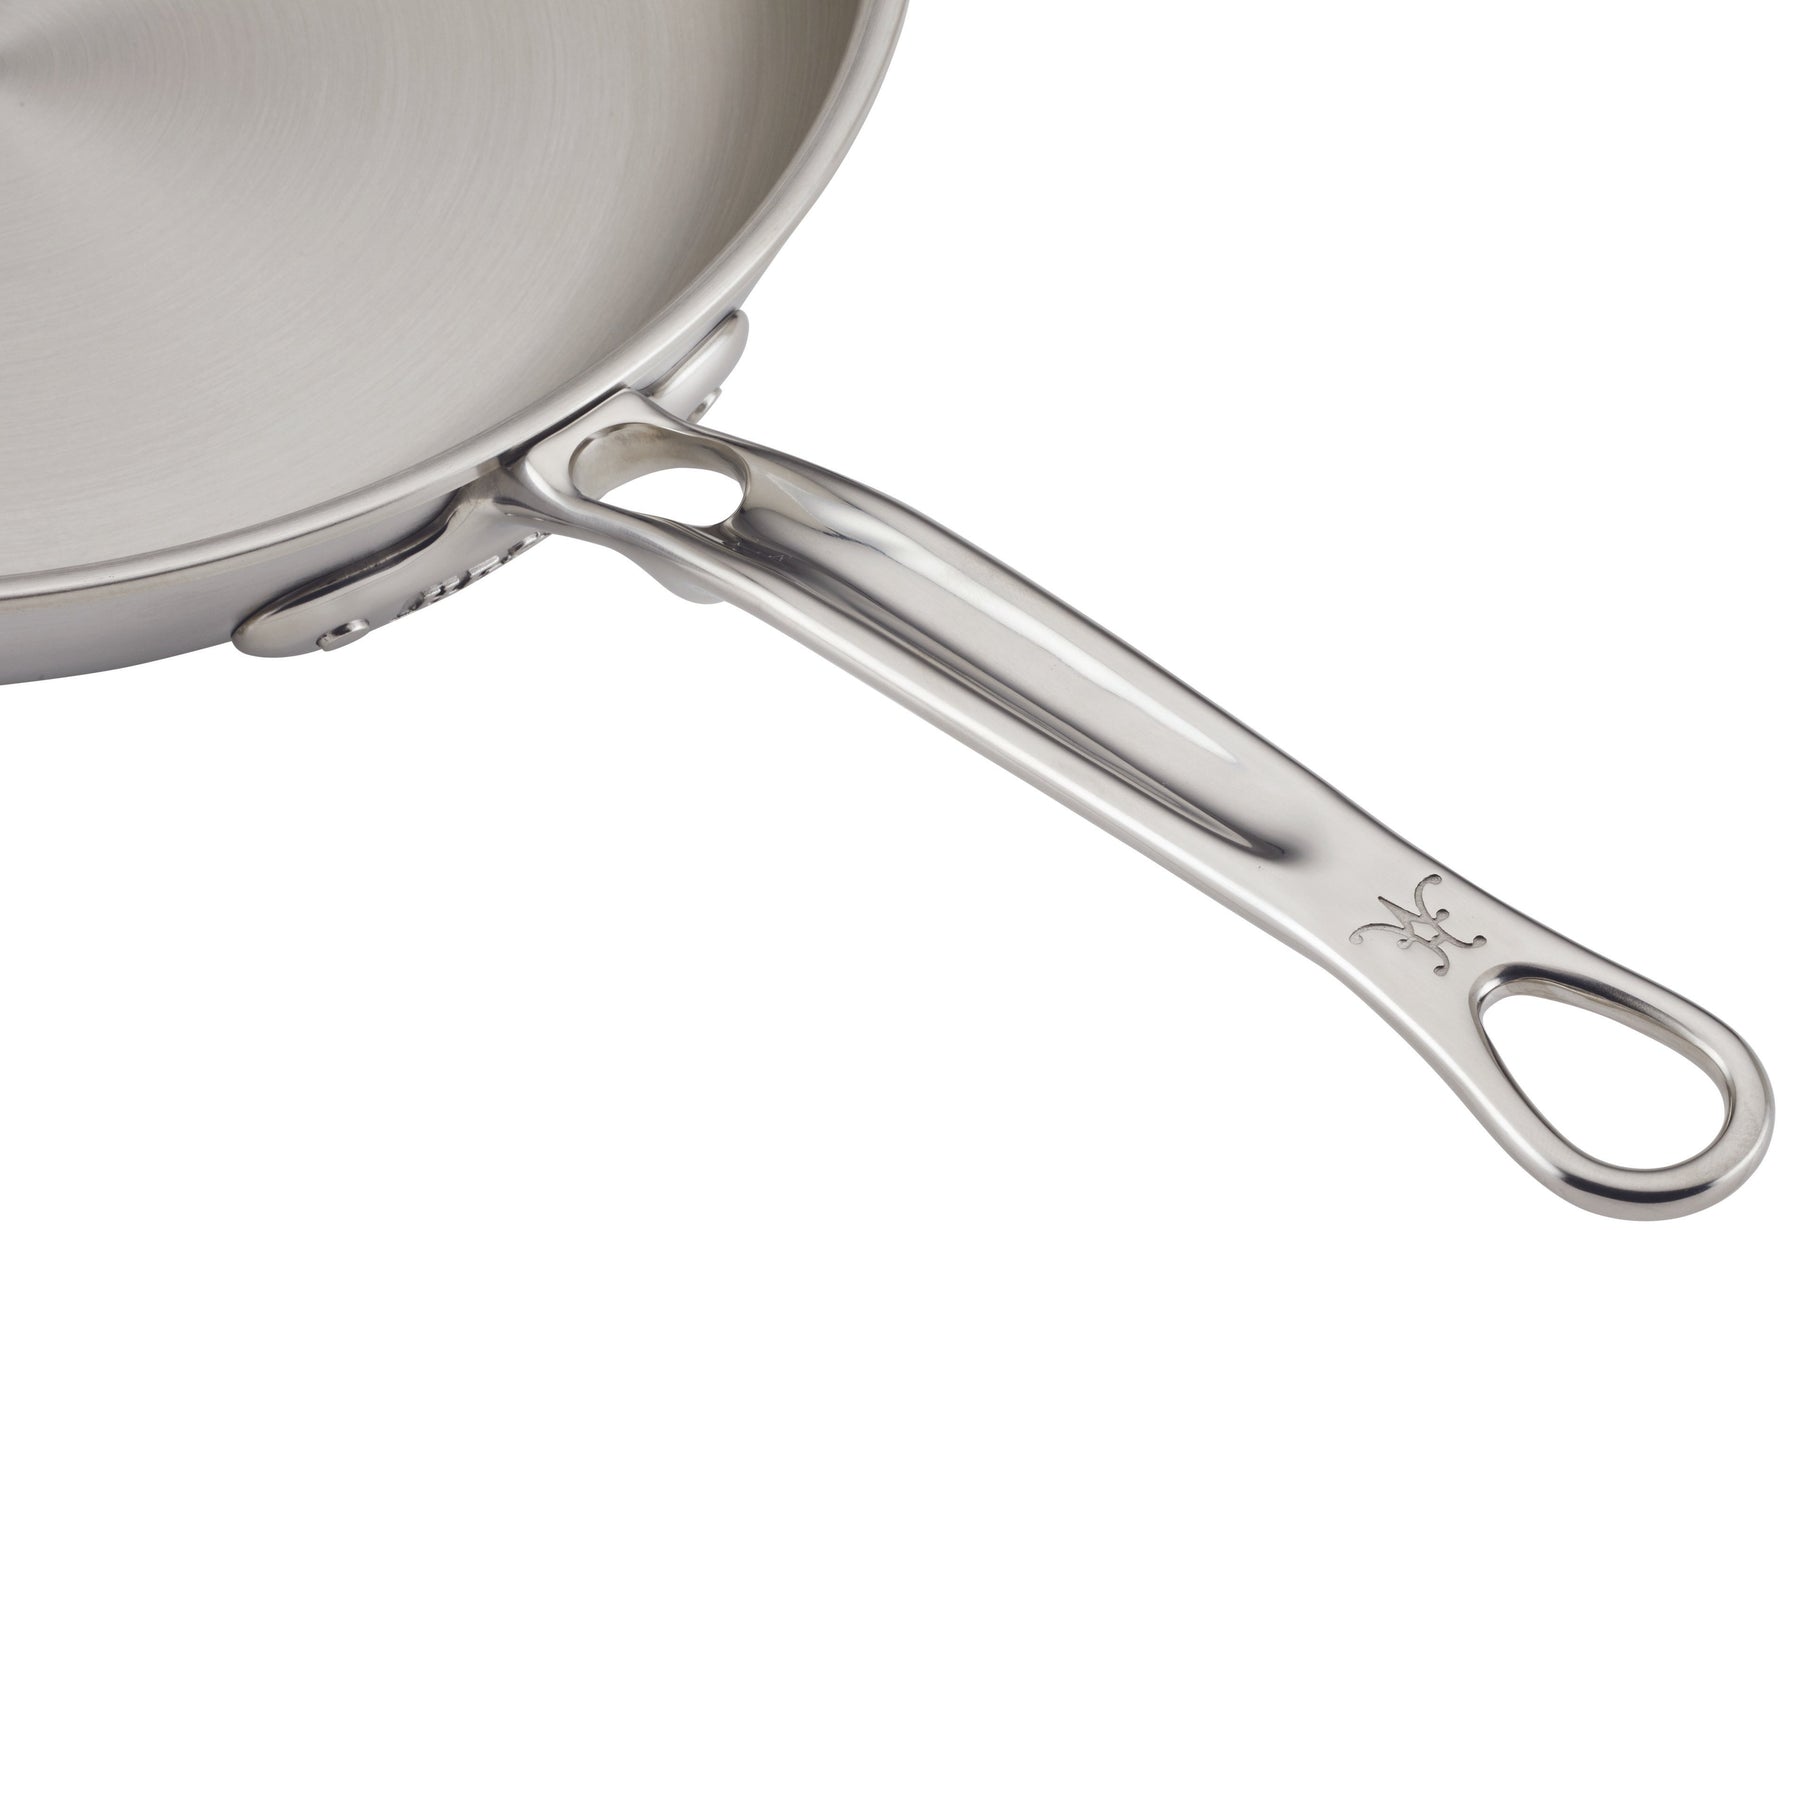 Thomas Keller Insignia Commercial Clad Stainless Steel Rondeaus